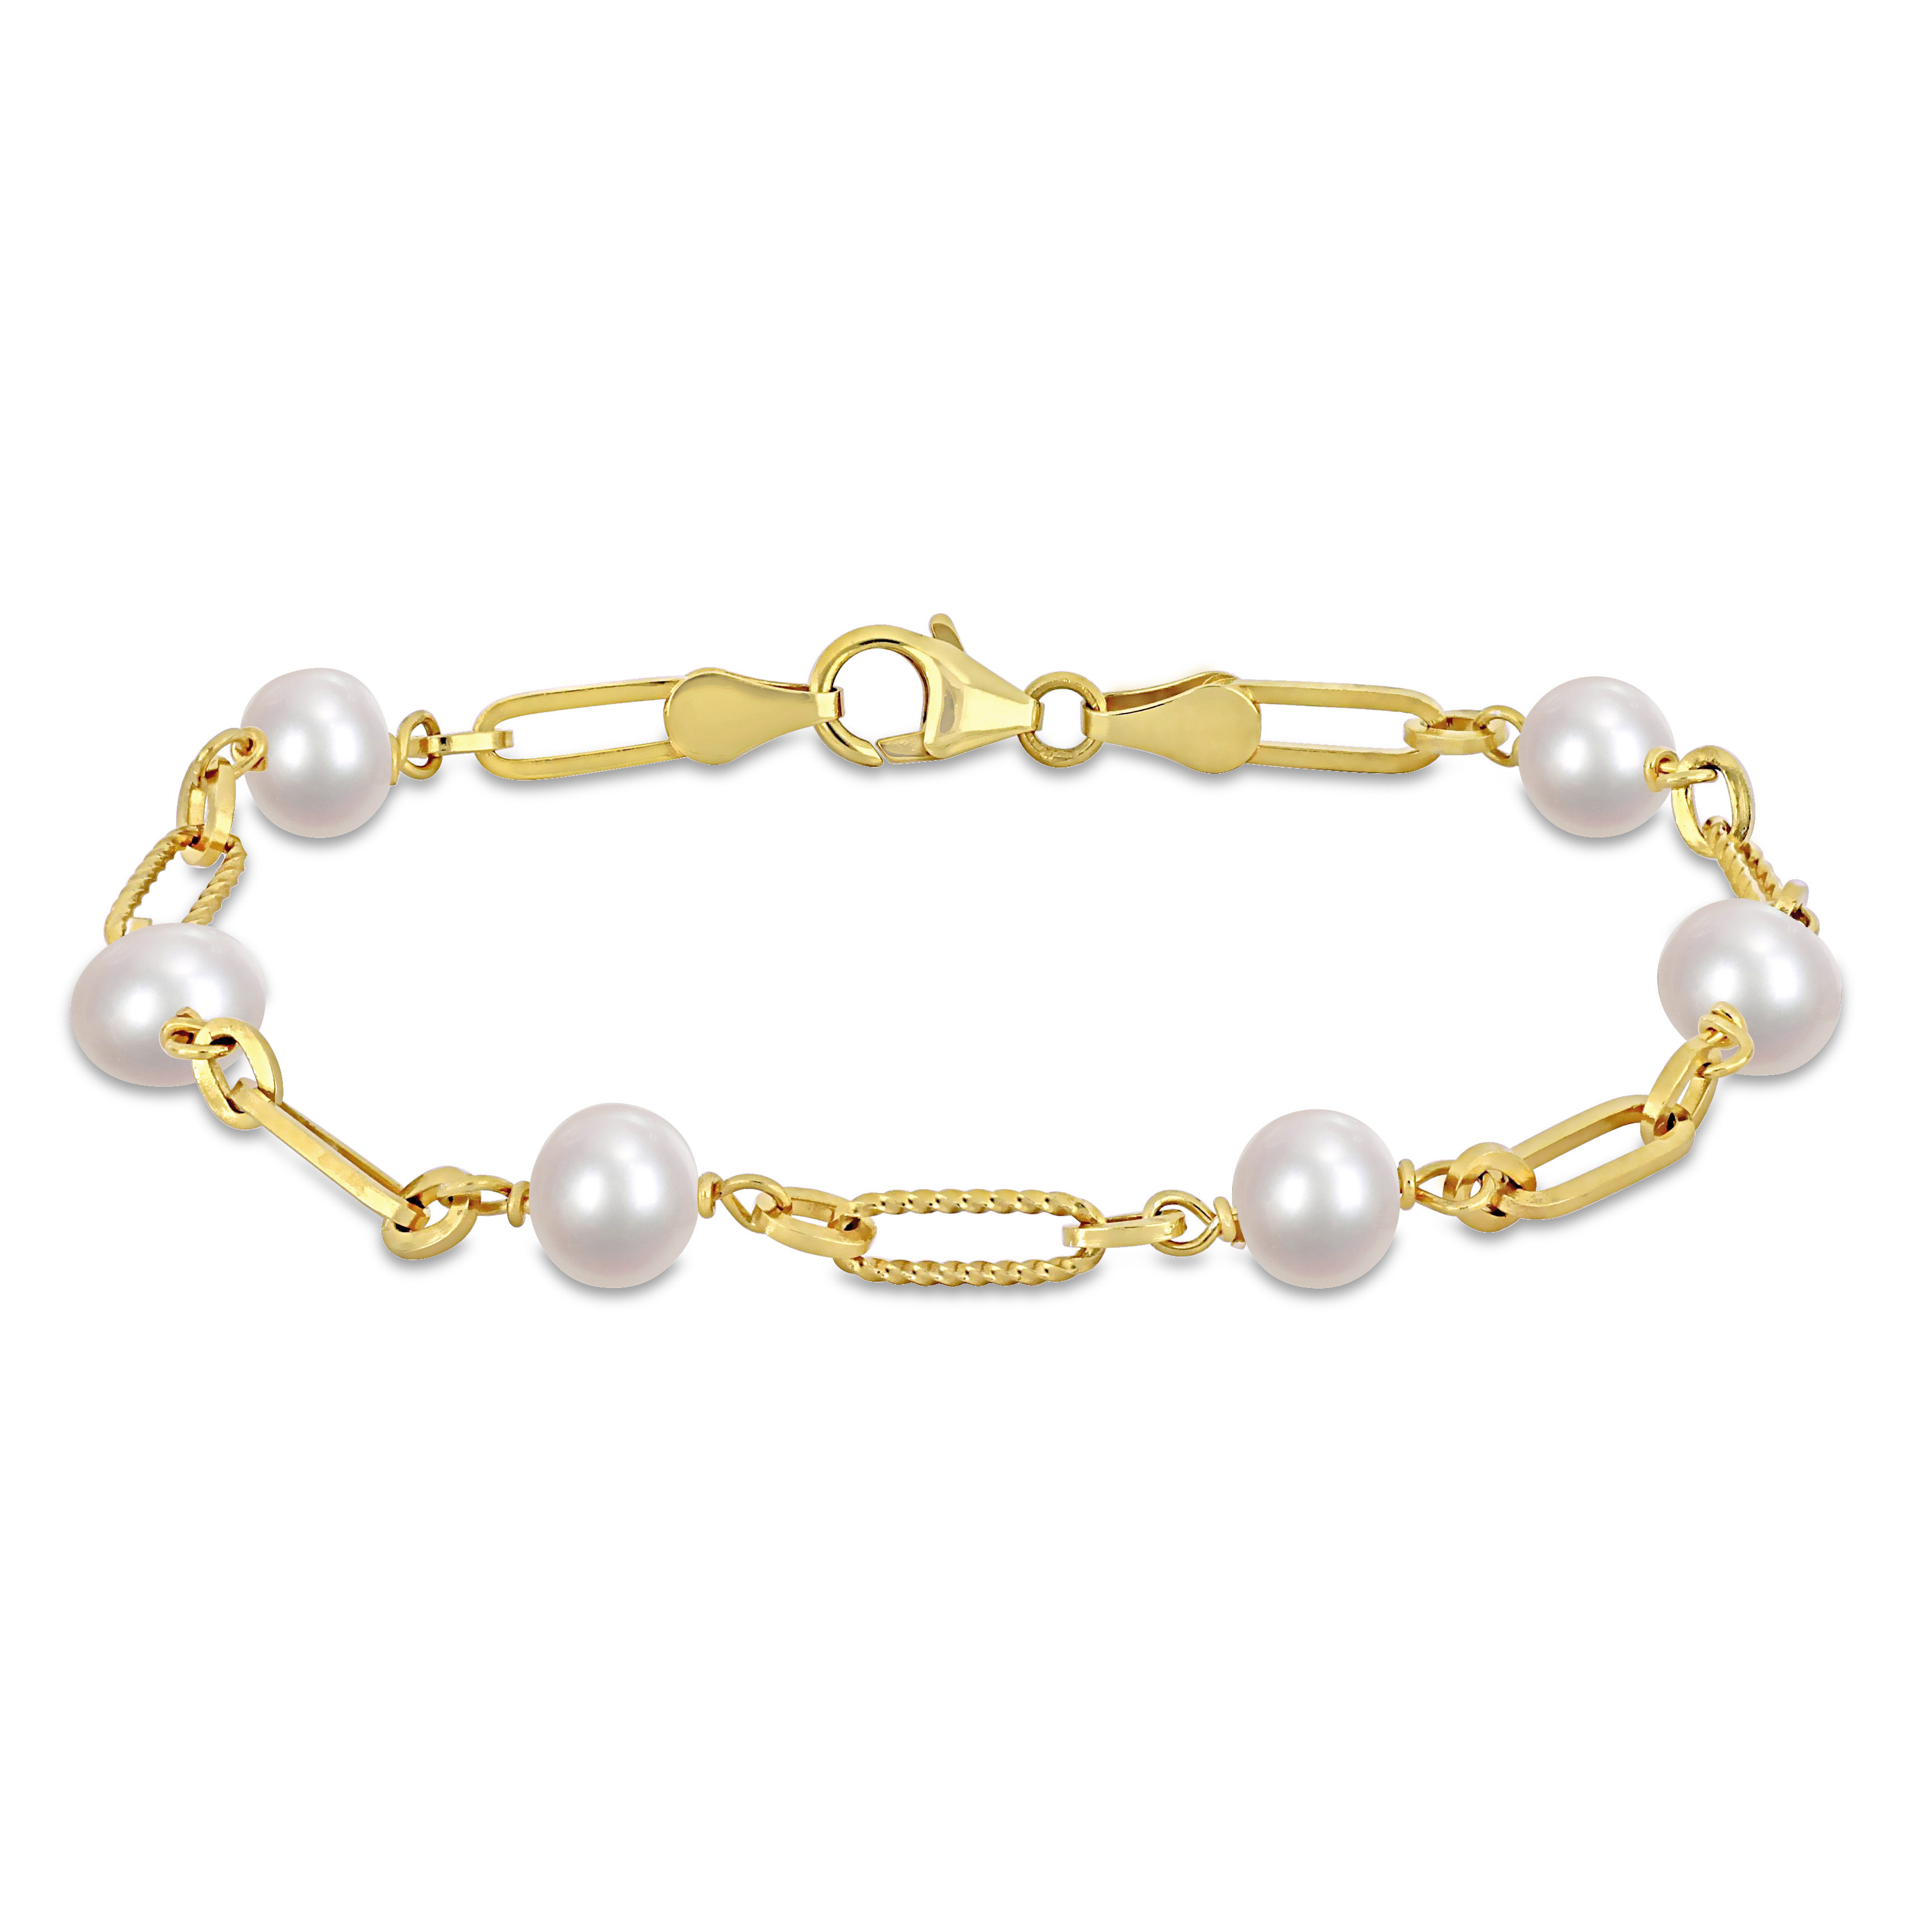 7-7.5mm Cultured Freshwater Pearl Station Link Bracelet in 18K Yellow Gold Plated Sterling Silver